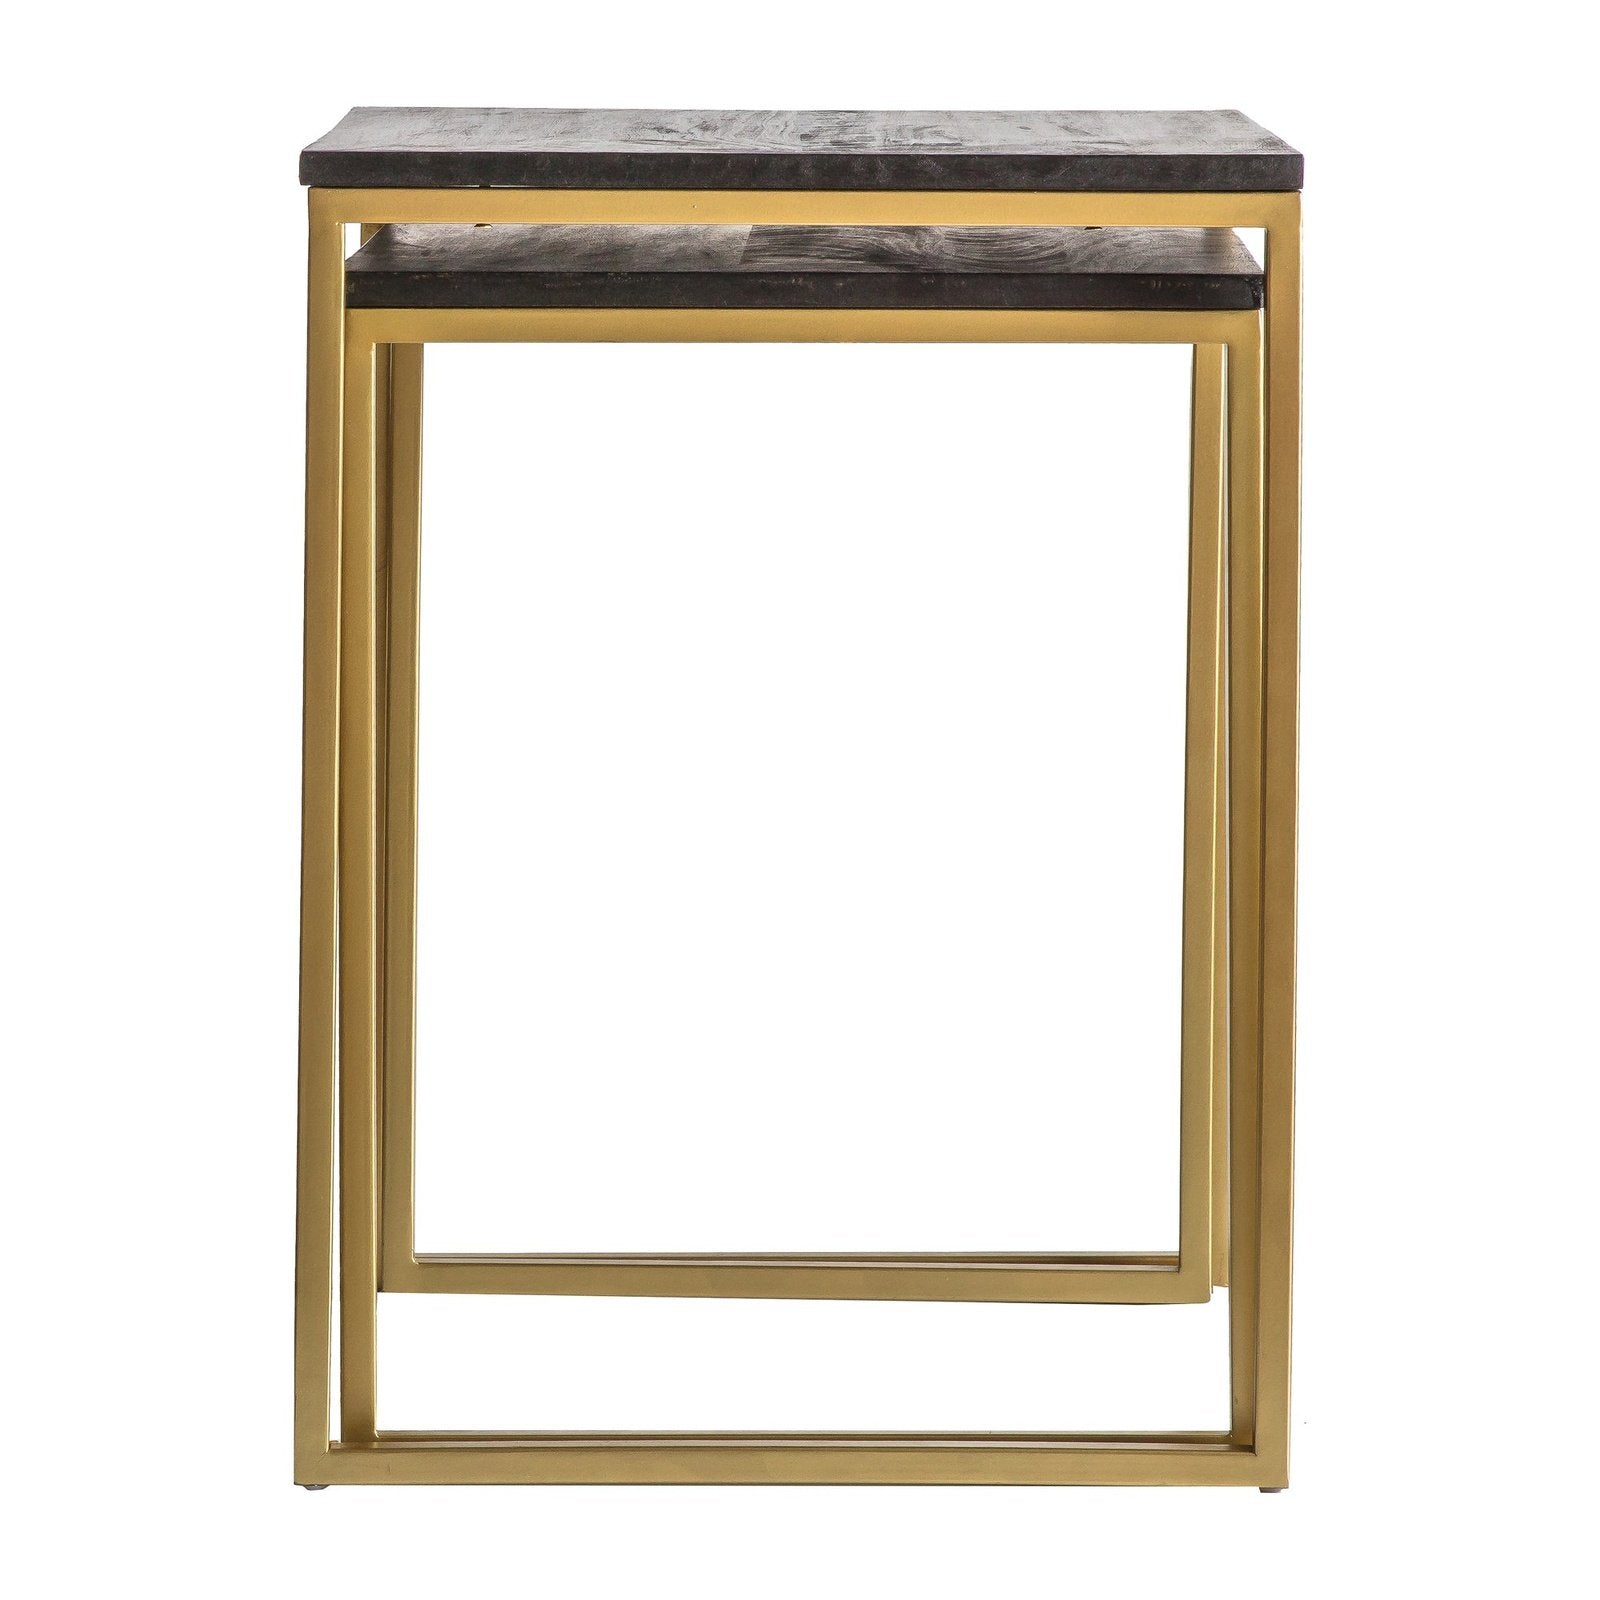 Gosford Nesting Tables Set of 2 - Metal Legs & Wooden Top - Minimalistic Industrial Design